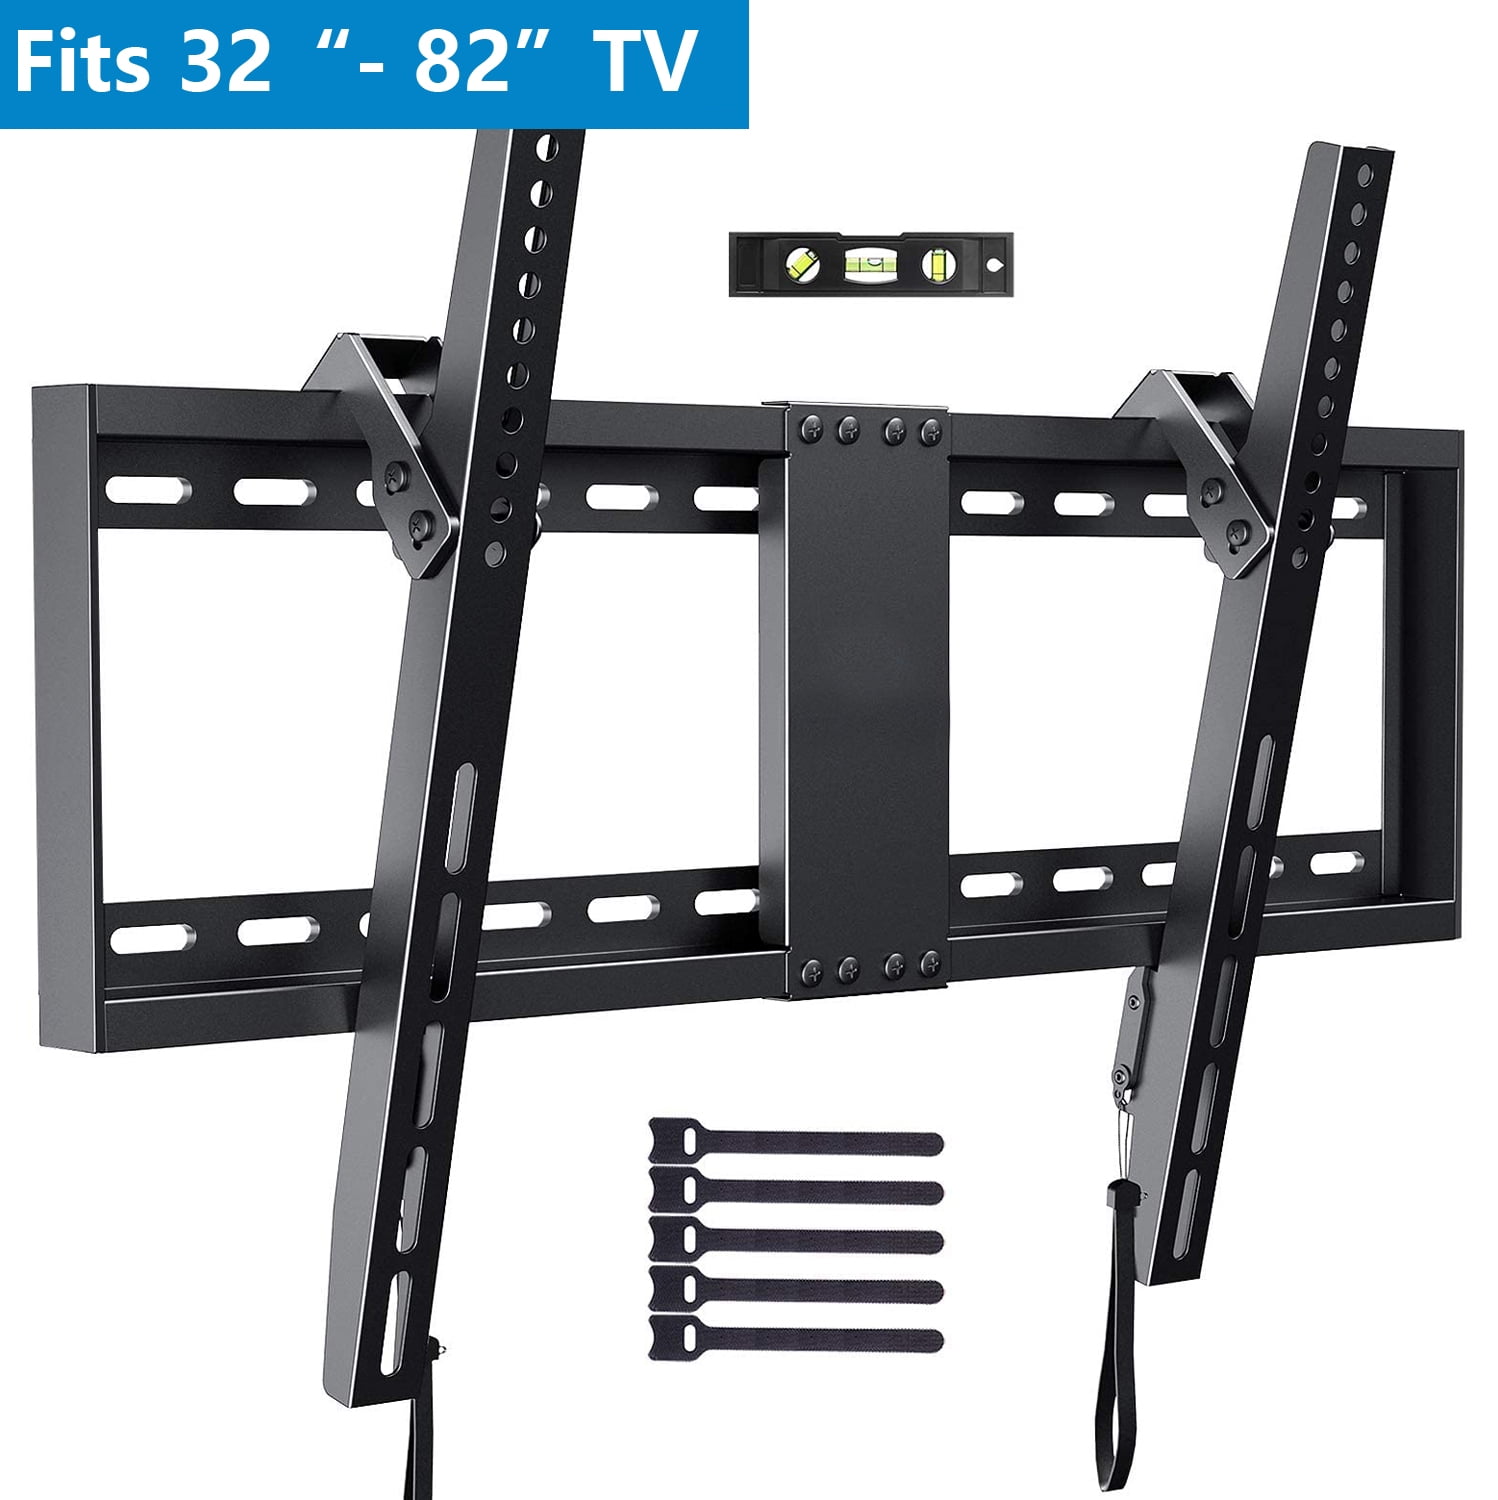 Tilt TV Wall Mount Bracket up to 85" and 132 lbs fits 16" 24" and 32" Wall Studs 